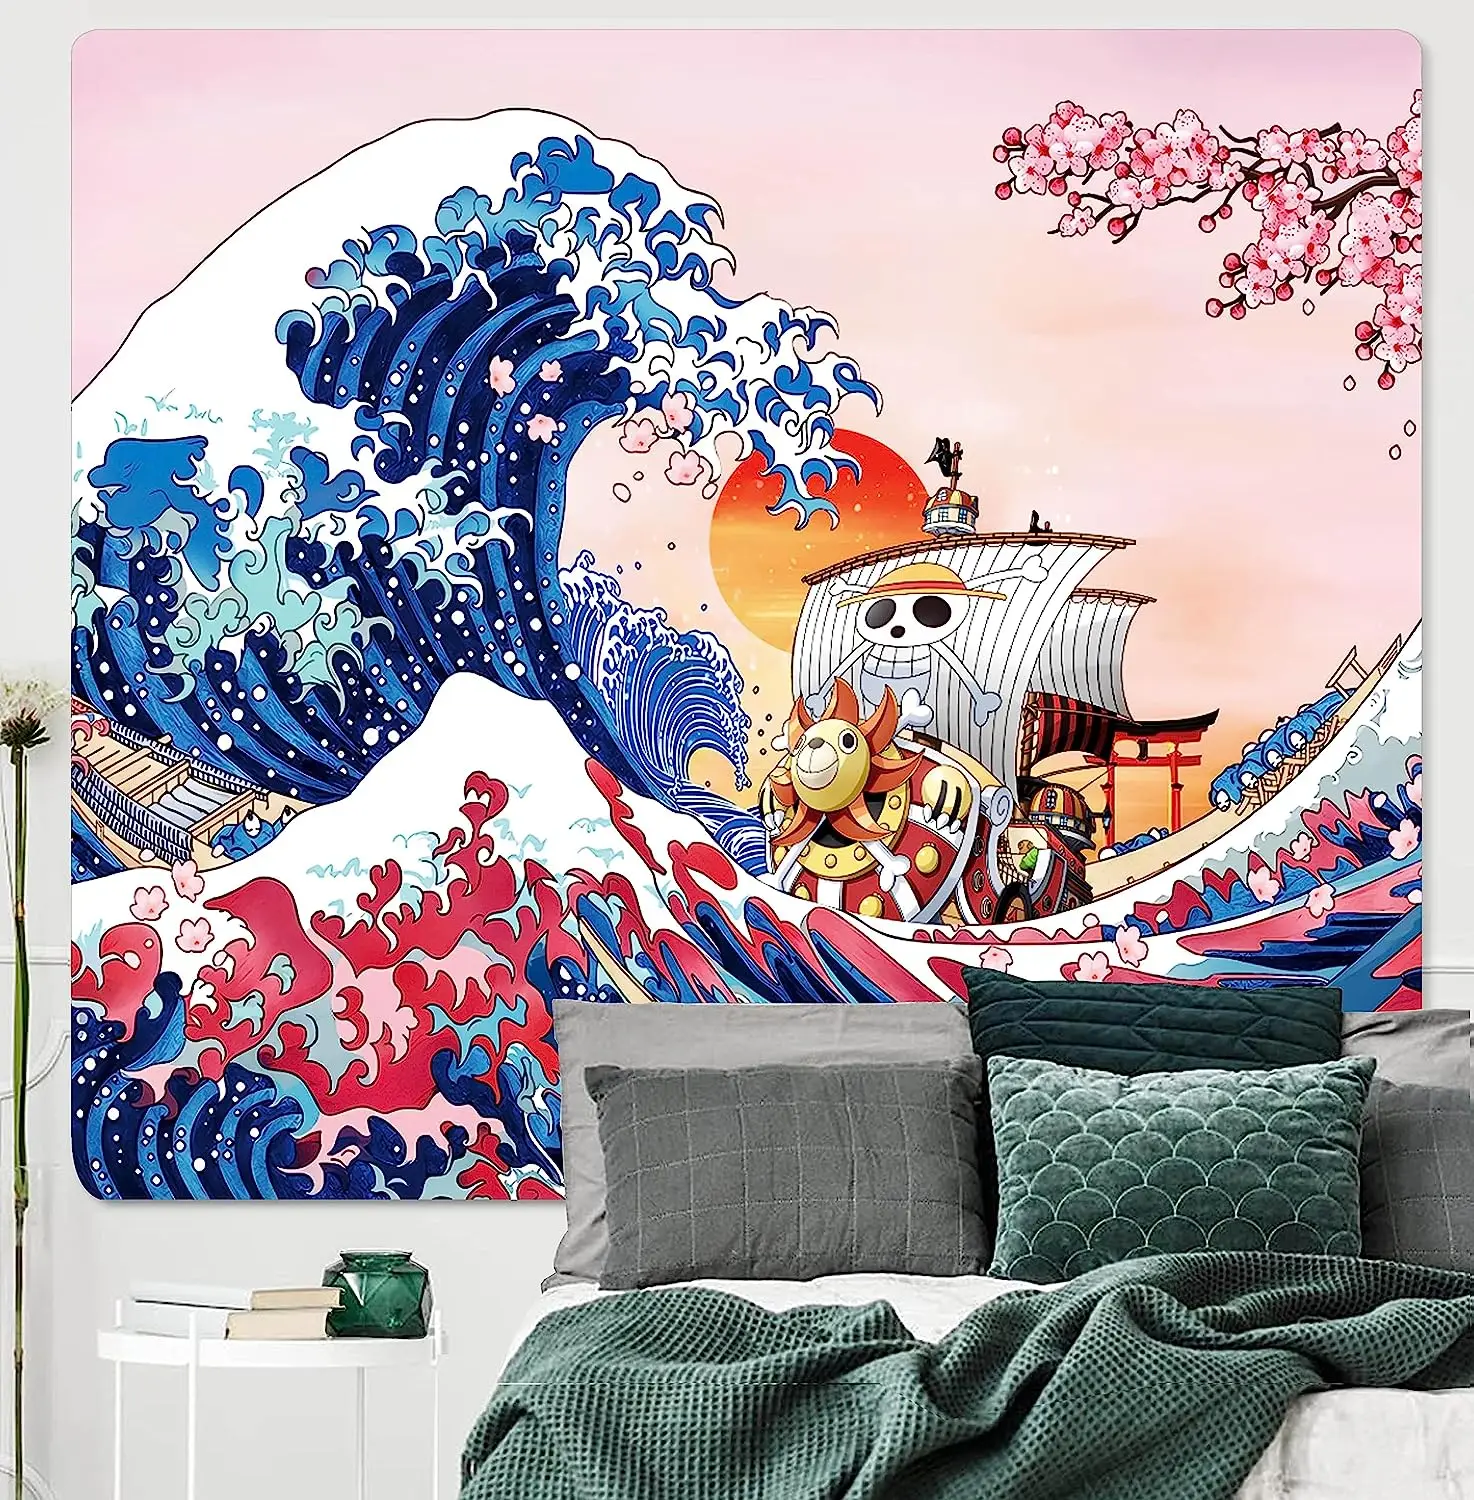 

Anime Tapestry Japanese Ocean Wave Wall Decor Cherry Sunset Mountain Wall Hanging Kanagawa Mural for Living Room Bedroom Decpr